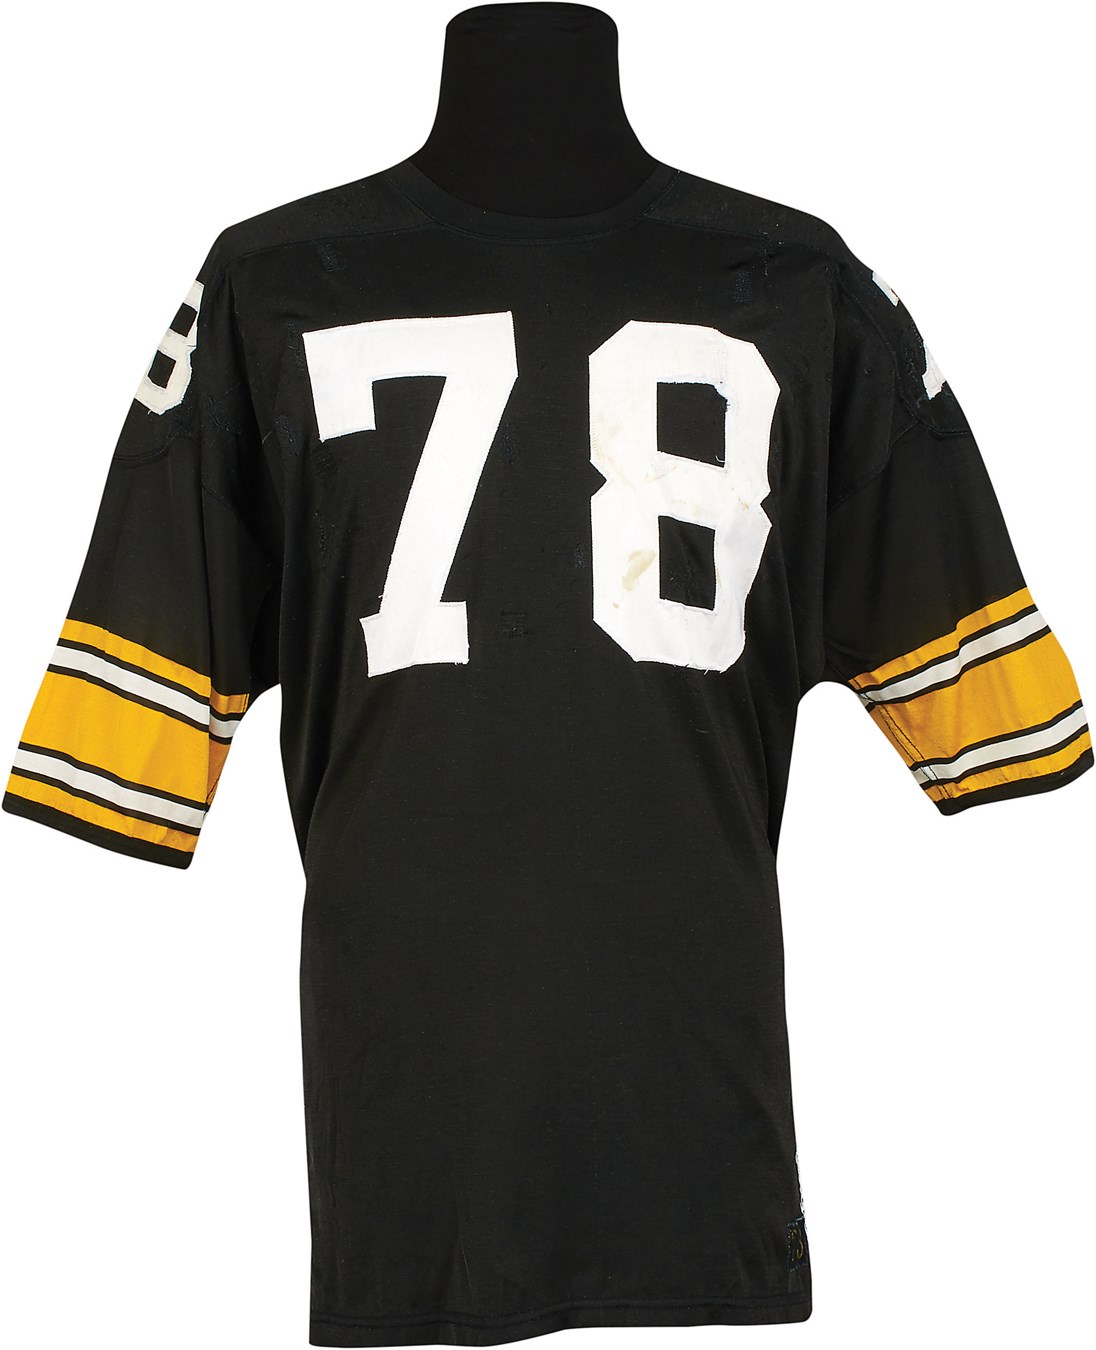 The Pittsburgh Steelers Game Worn Jersey Archive - 1973 Dwight White Pittsburgh Steelers Game Worn Jersey (Photomatched)